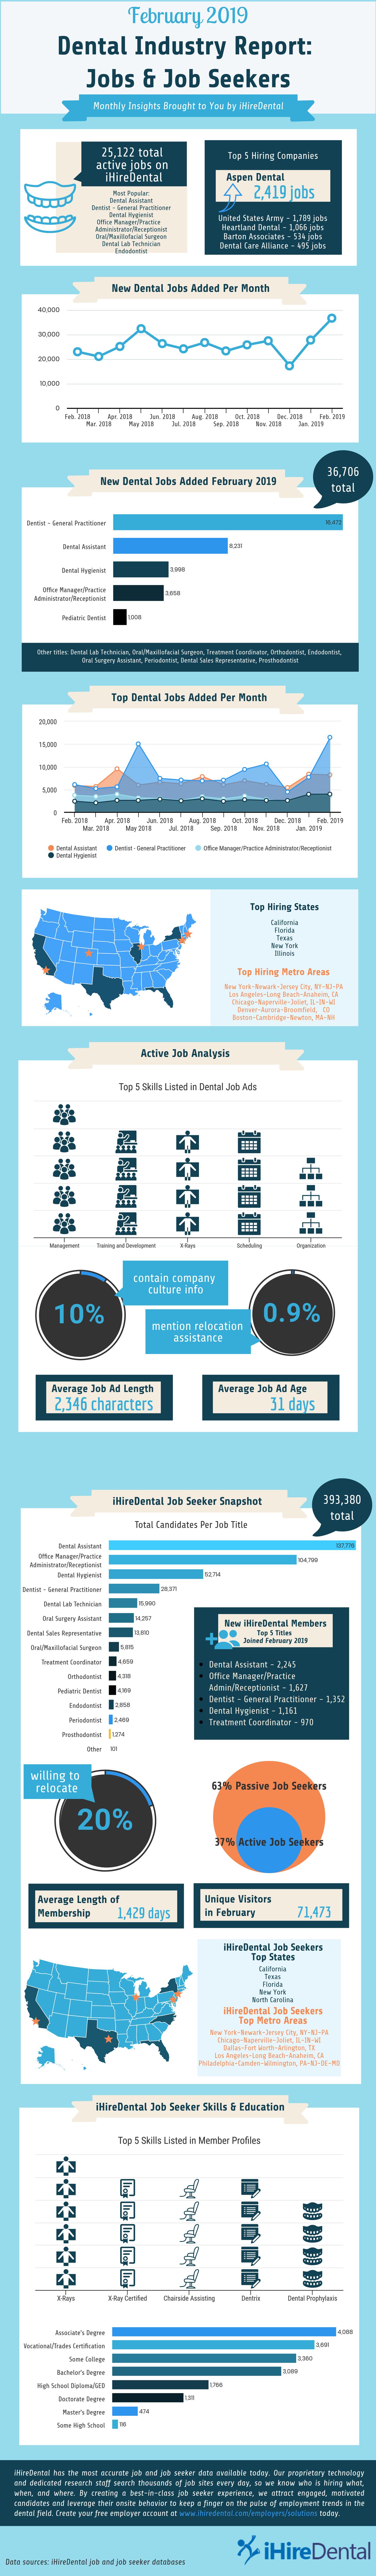 ihiredental feb 2019 industry report infographic